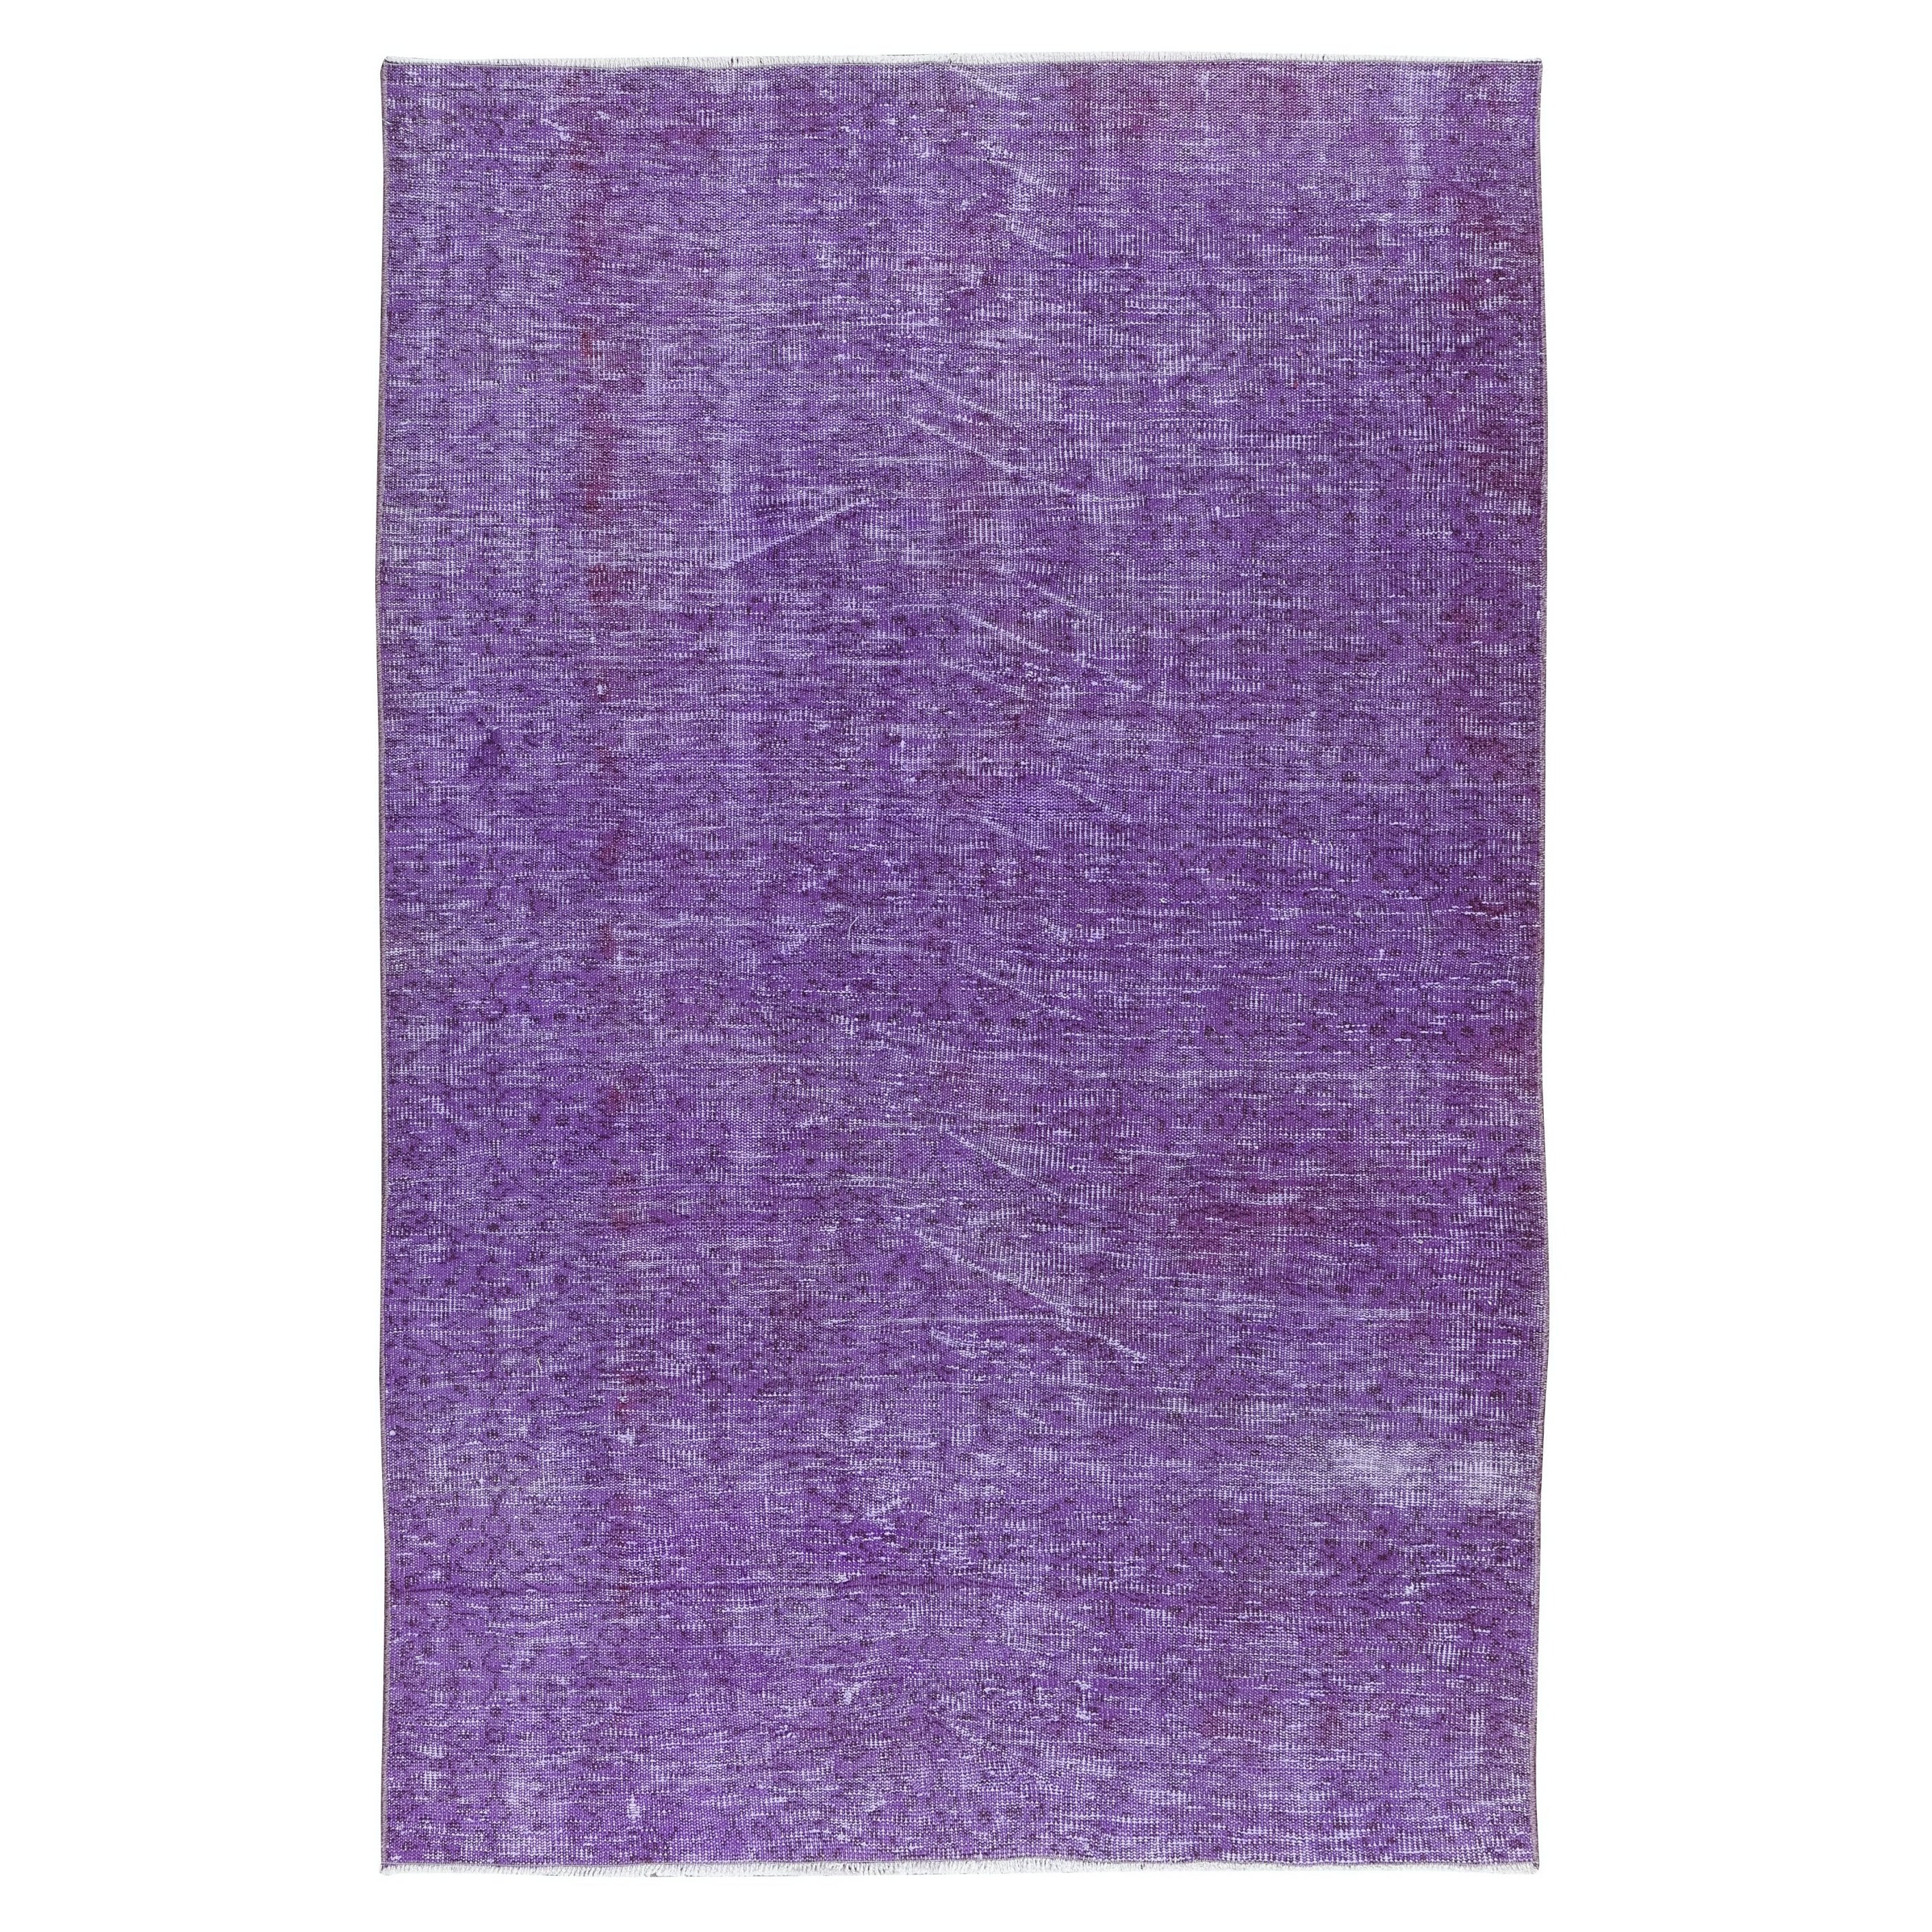 4.8x7.5 Ft Royal Purple Handknotted Room Size Area Rug. Modern Turkish Carpet